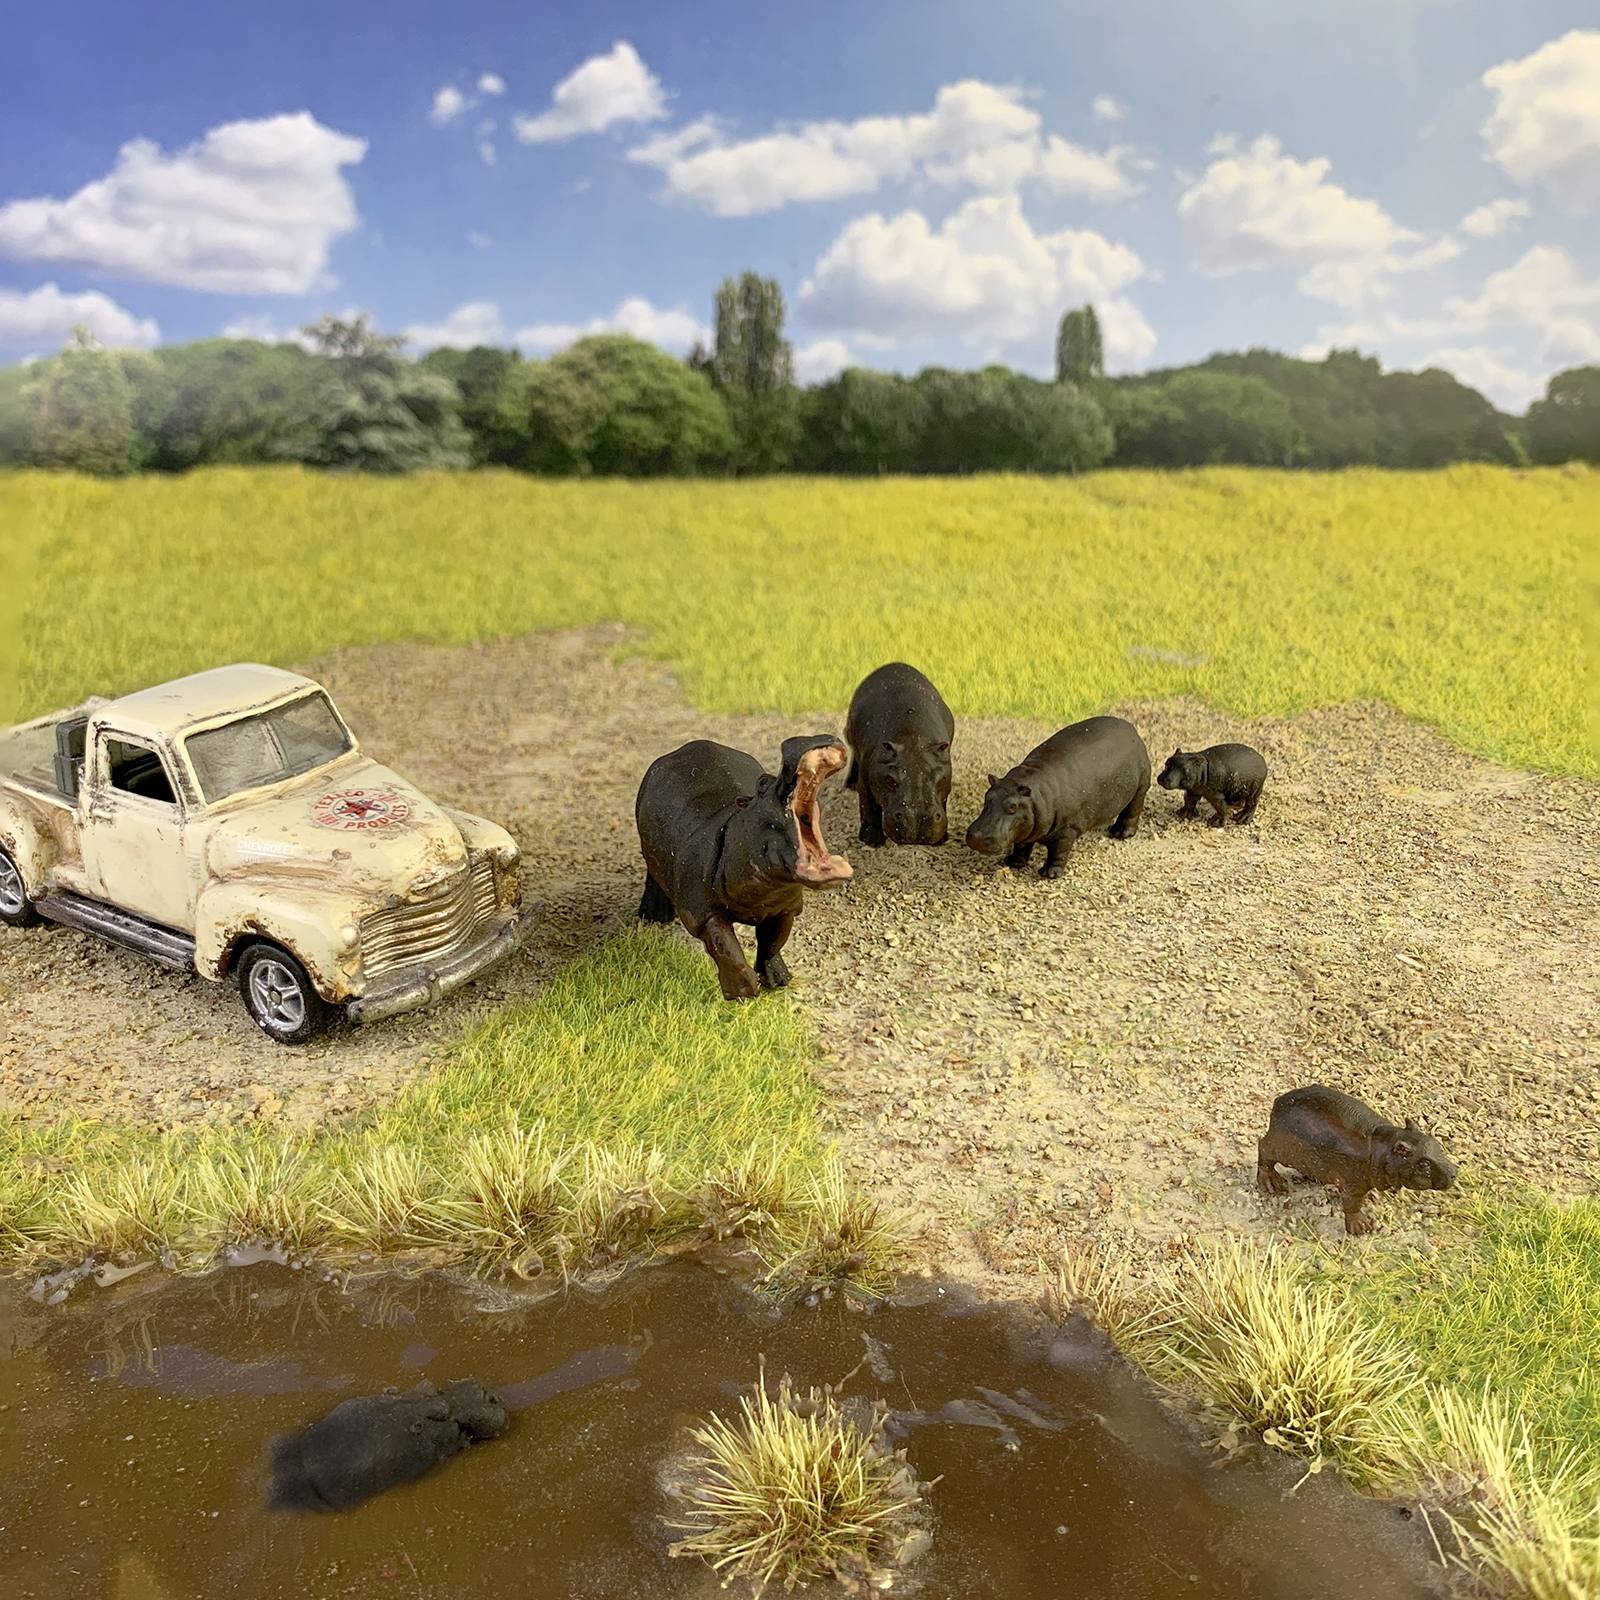 1-64 scale herd of hippos for diorama